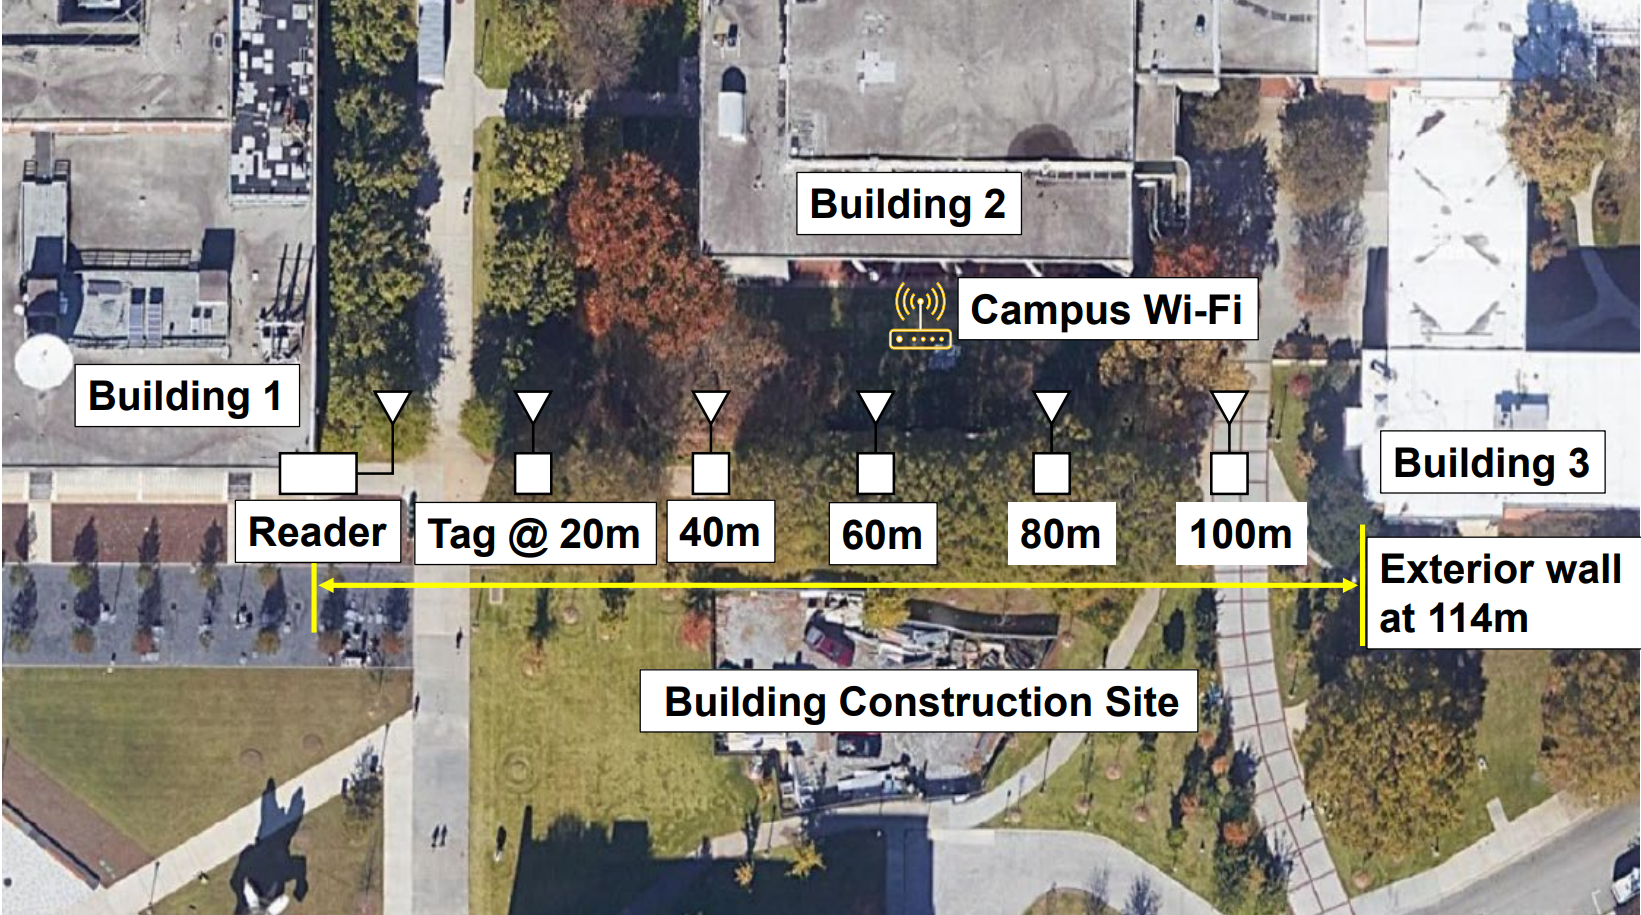 Photo of a tree-filled campus showing 3 buildings and a central Wi-Fi spot in the upper half. A construction site is in the lower half and QTTs are depicted at 20m intervals between a reader and an exterior wall at 114 meters along the median.